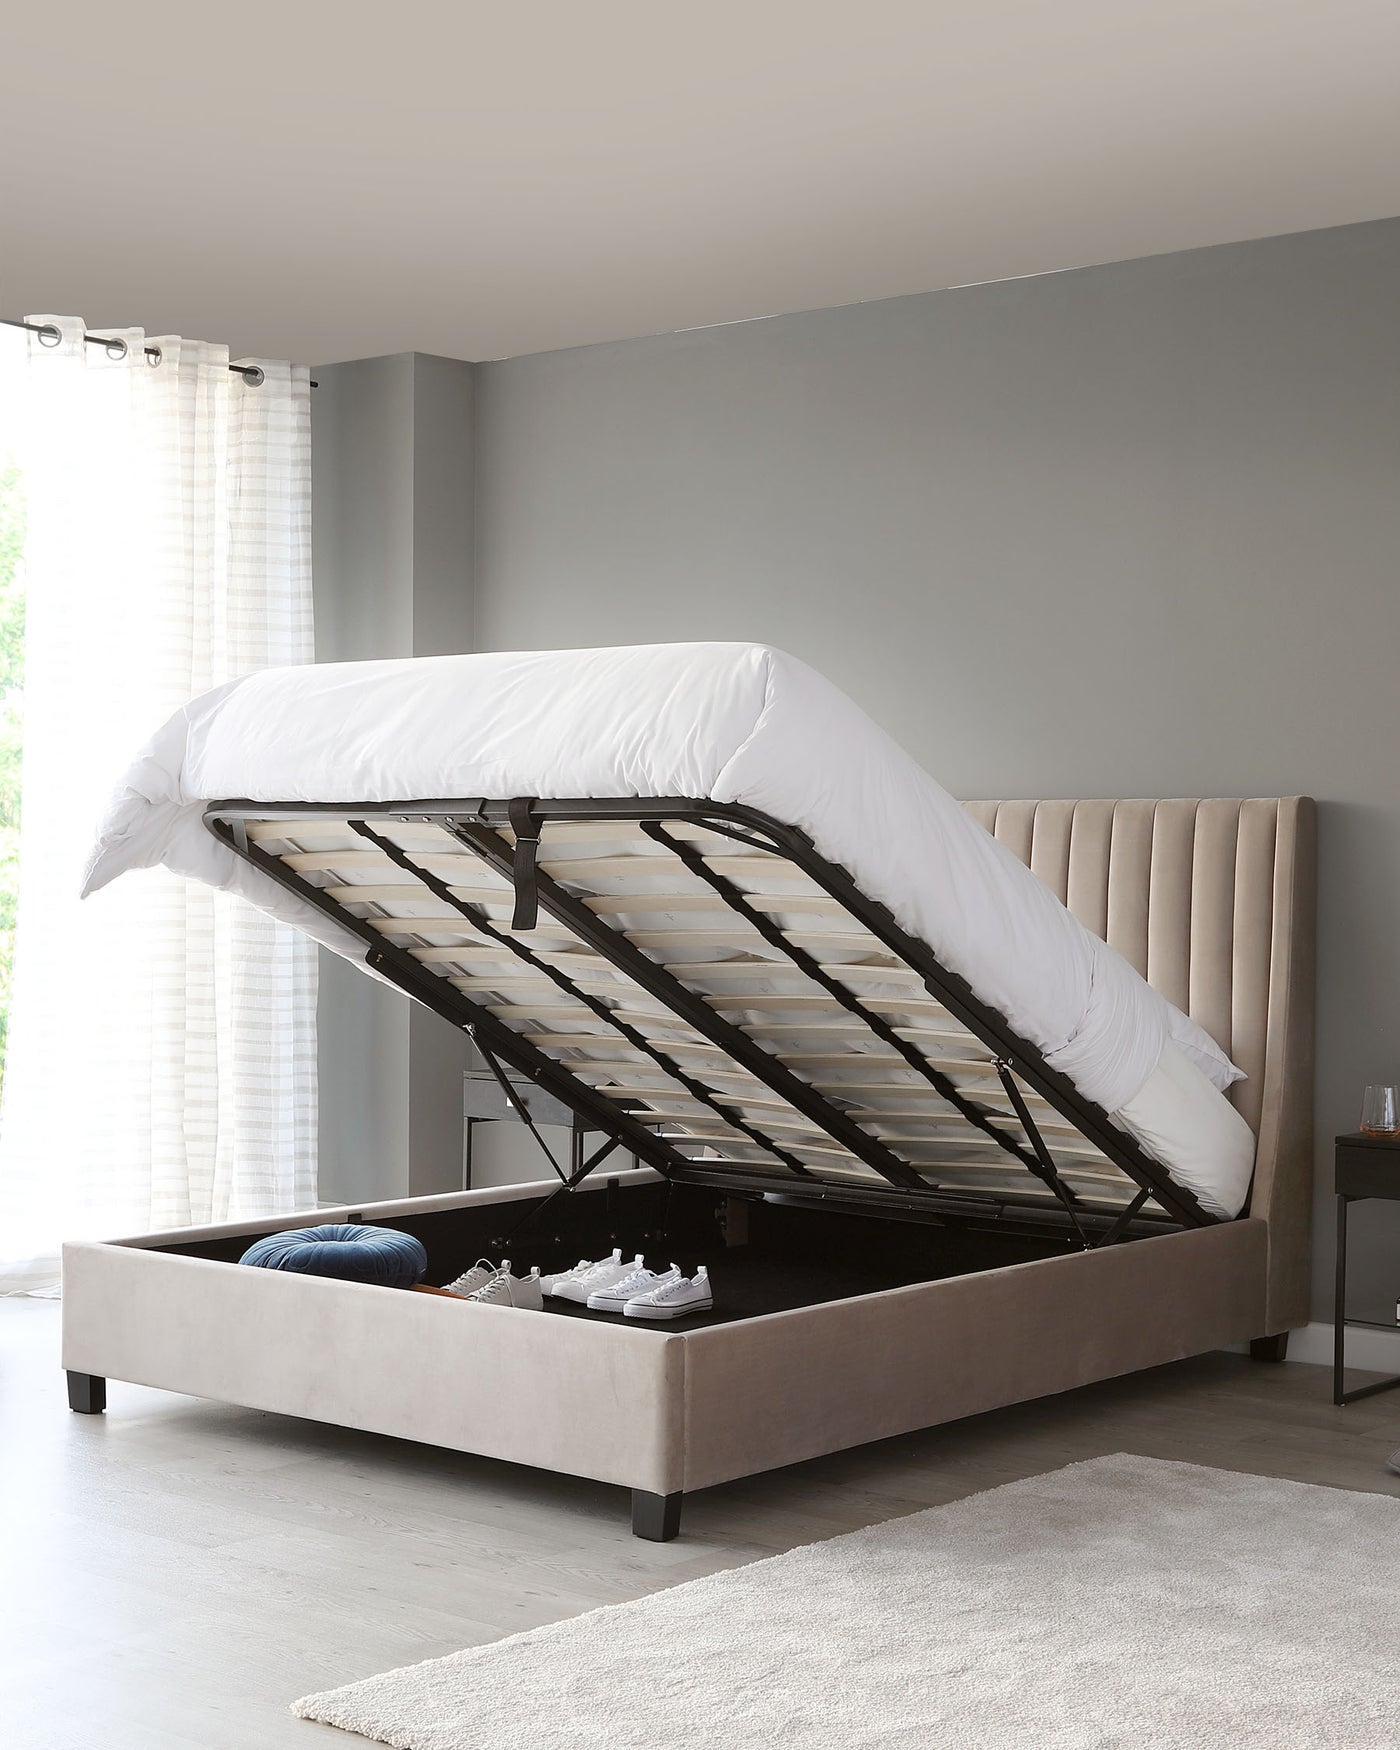 Contemporary taupe upholstered storage bed with a tufted headboard design and a gas-lift mechanism revealing under-bed storage space.